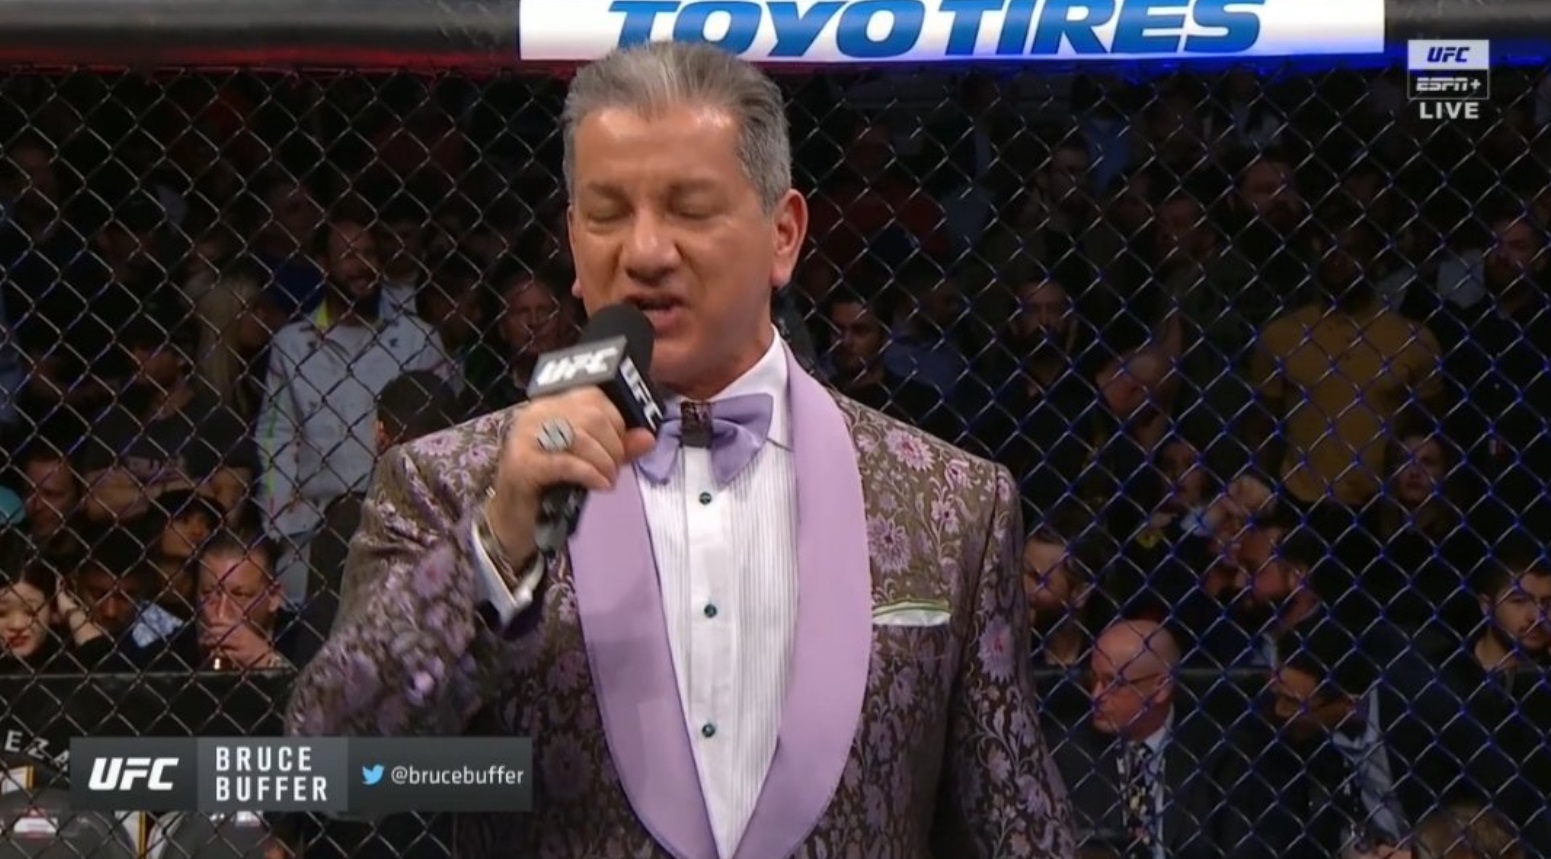 PHOTO Bruce Buffer Wearing His Grandma's Purple Curtains On His Suit